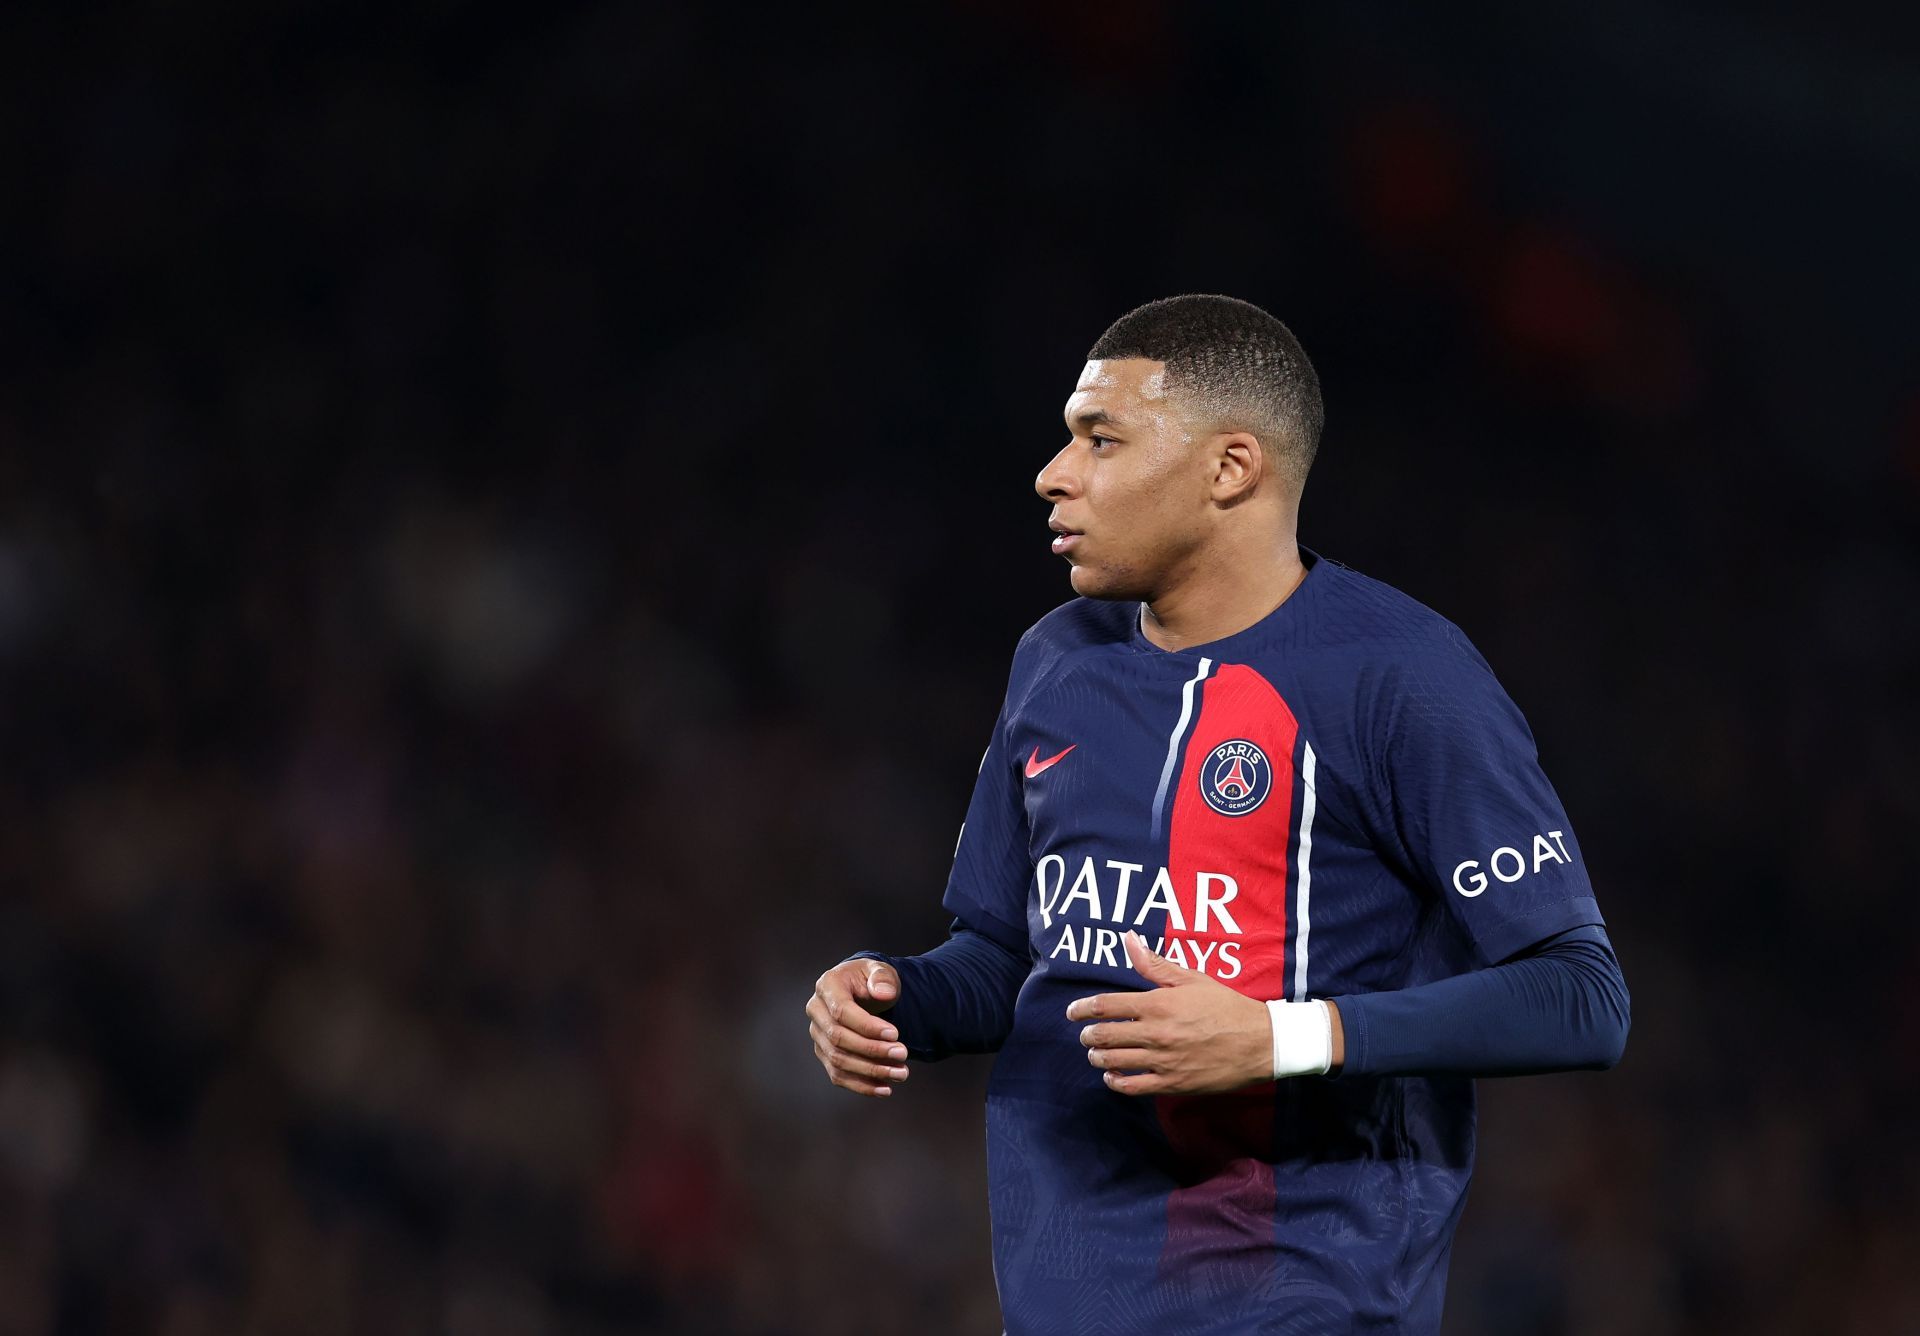 Kylian Mbappe is edging closer to his dream move to the Santiago Bernabeu.